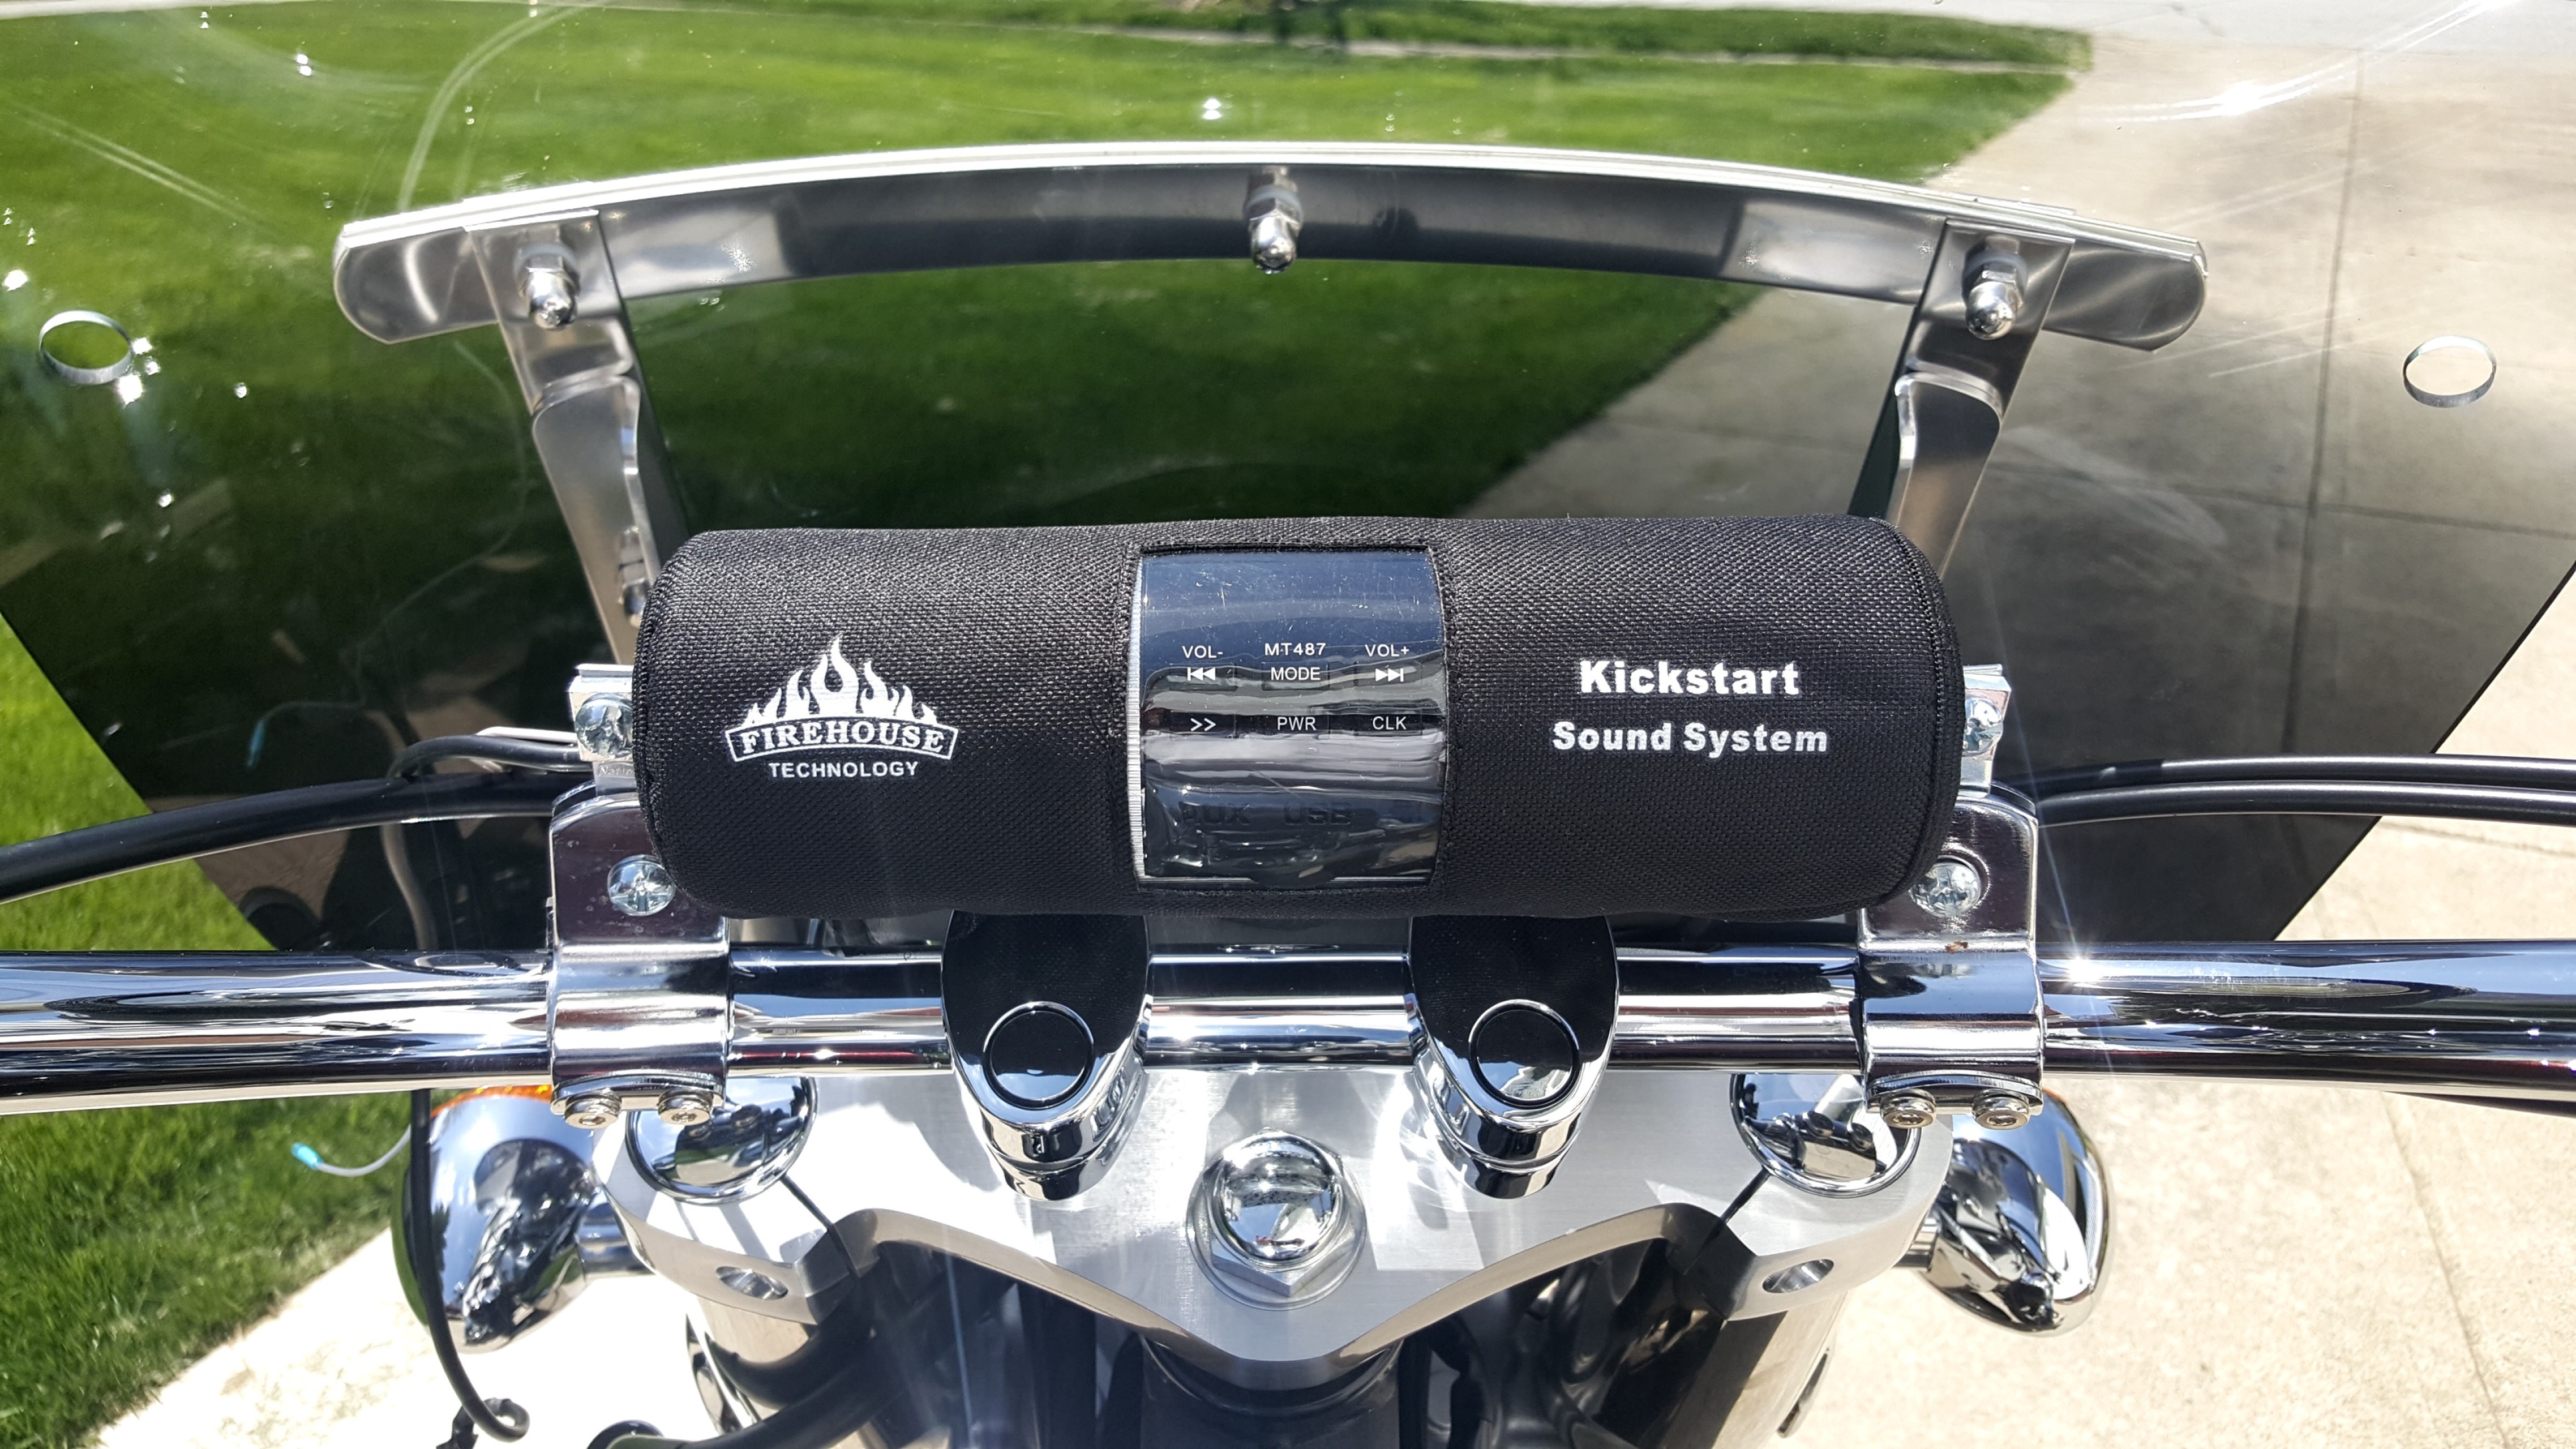 bluetooth speaker system for motorcycle